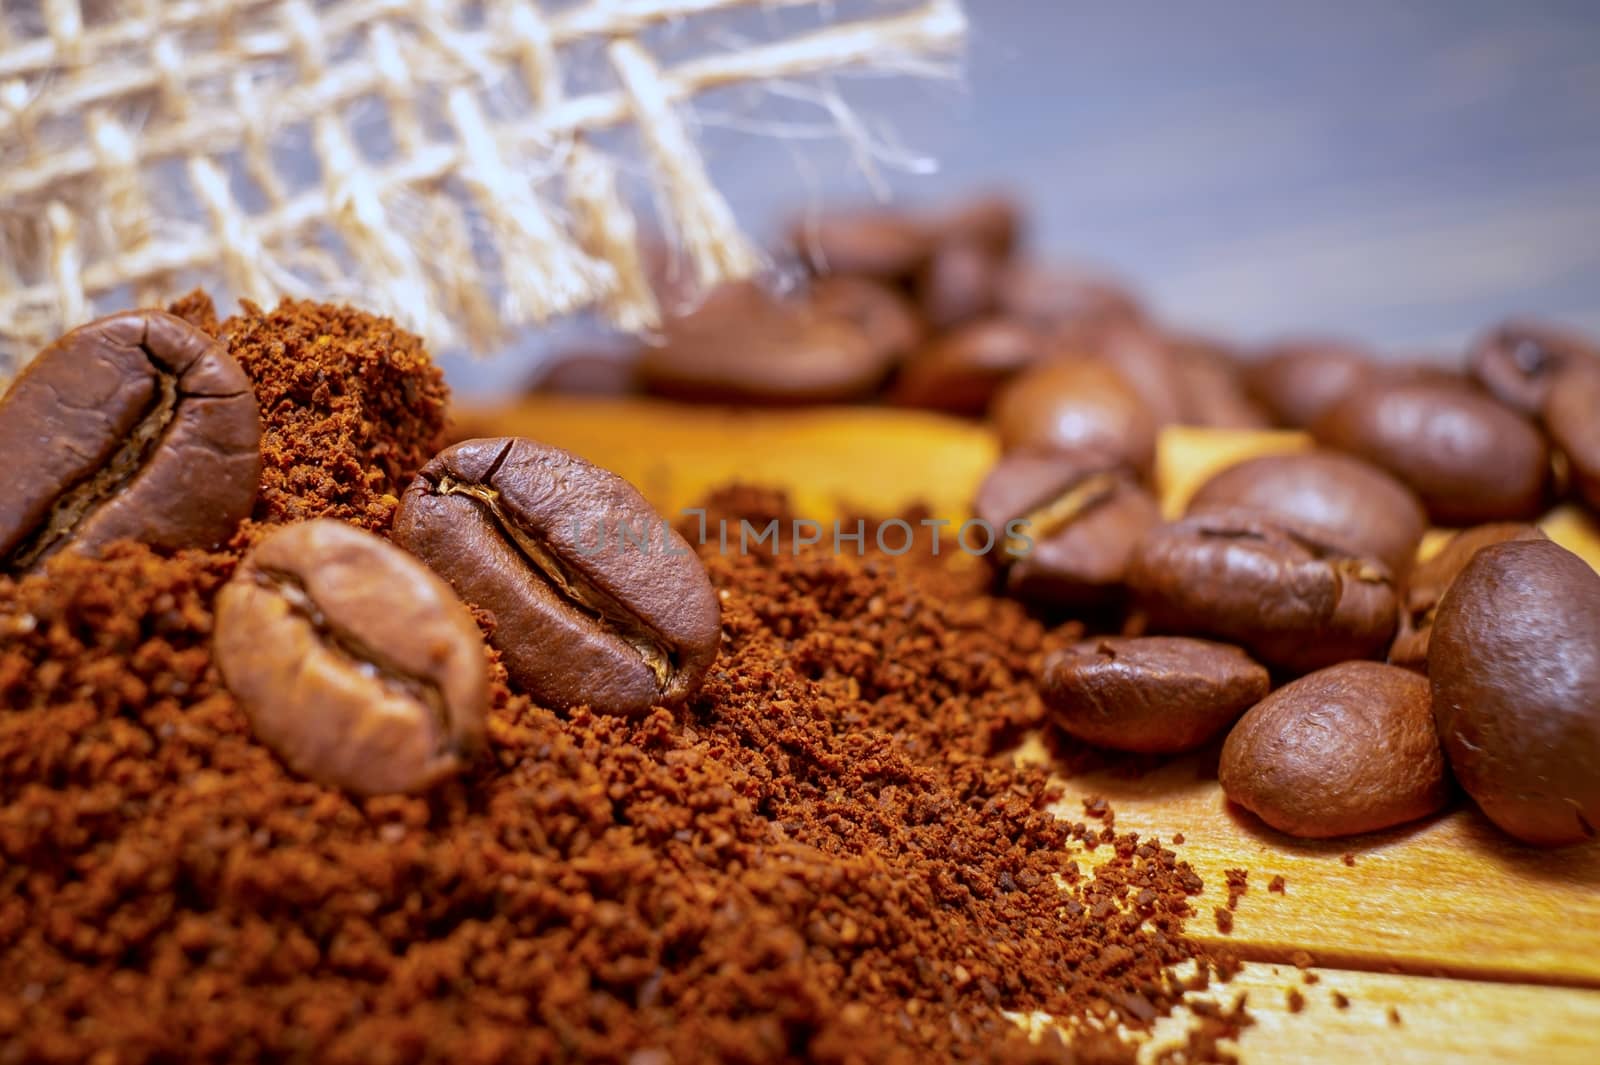 Roasted coffee beans and ground coffee in close up